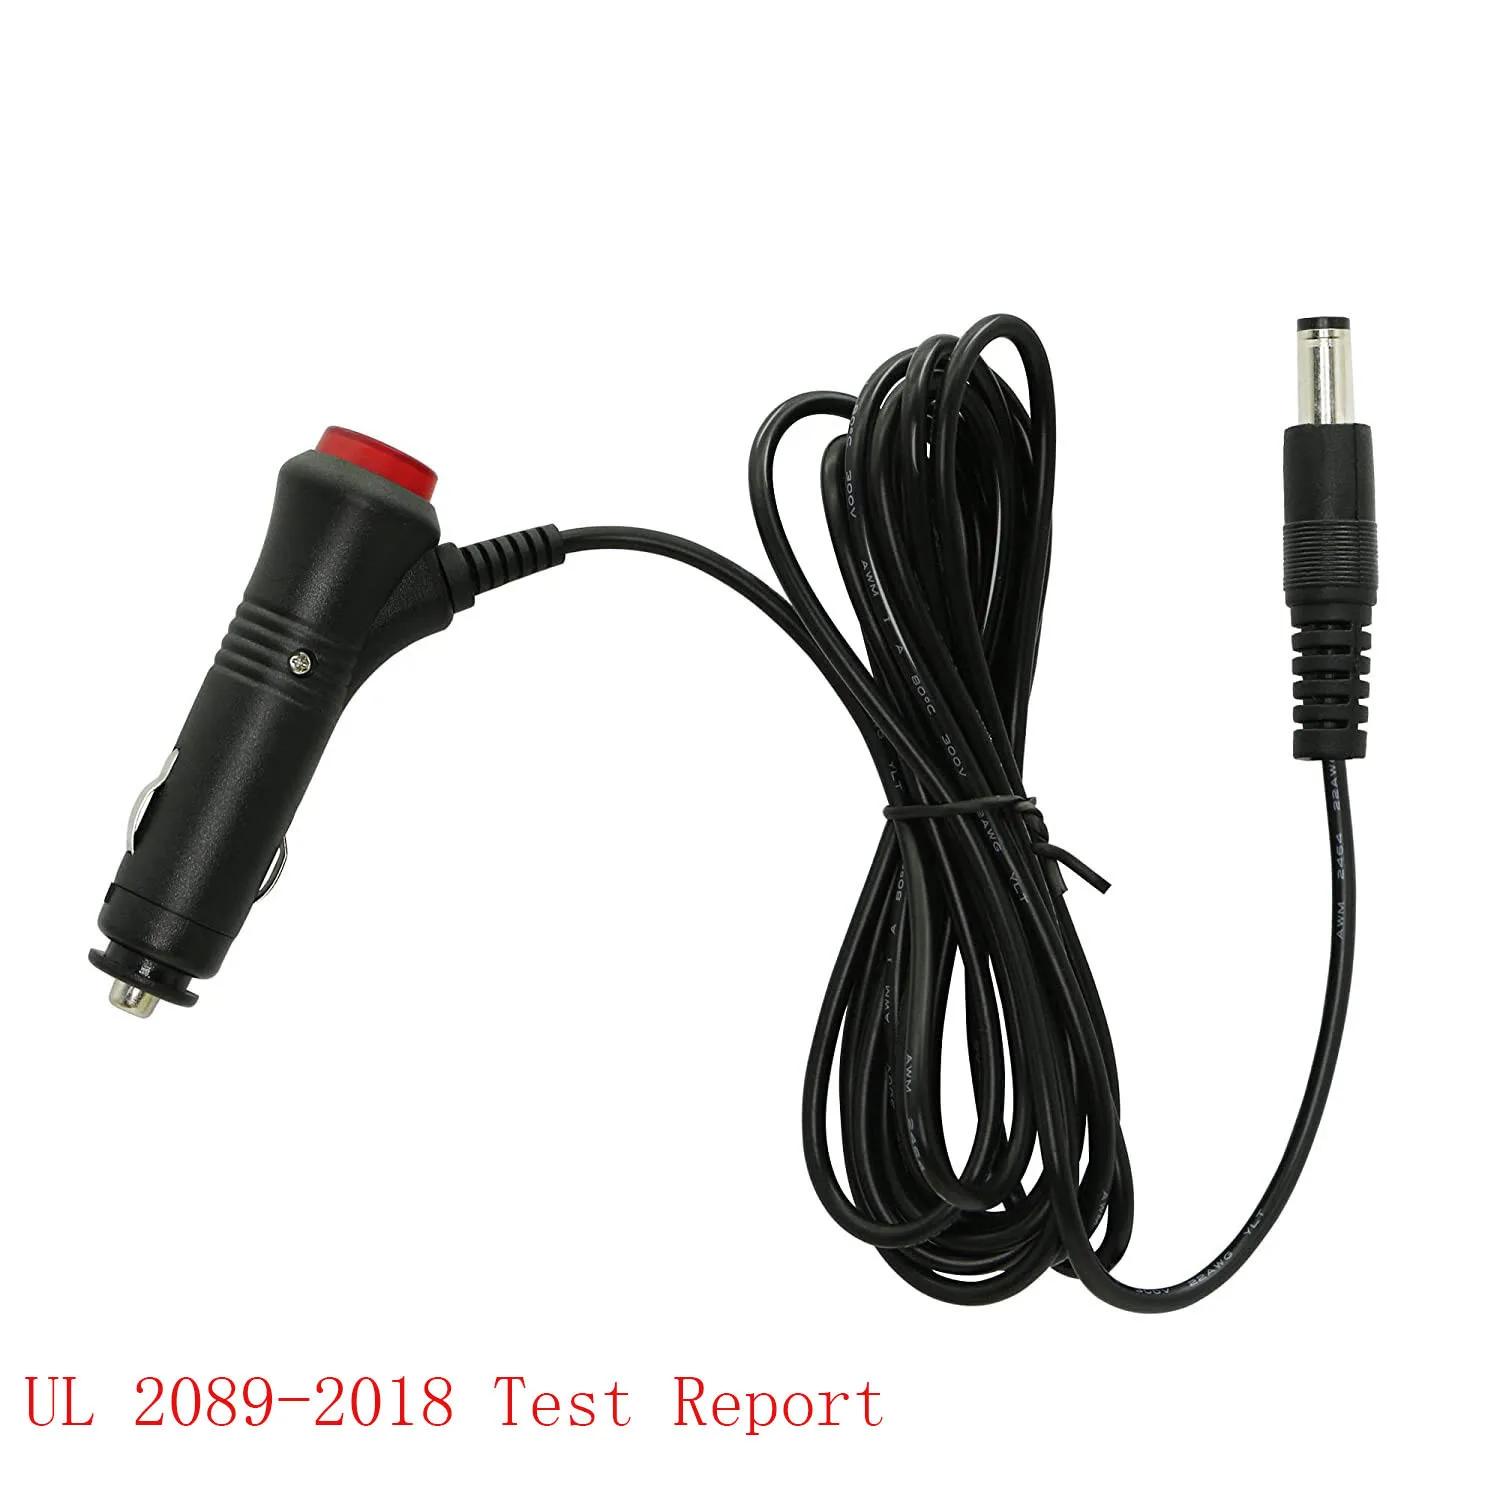 

12V 24V Car Cigarette Lighter Socket Plug Adapter Cable DC Plug 2.1mm Supplies to power and charge most electronic devices